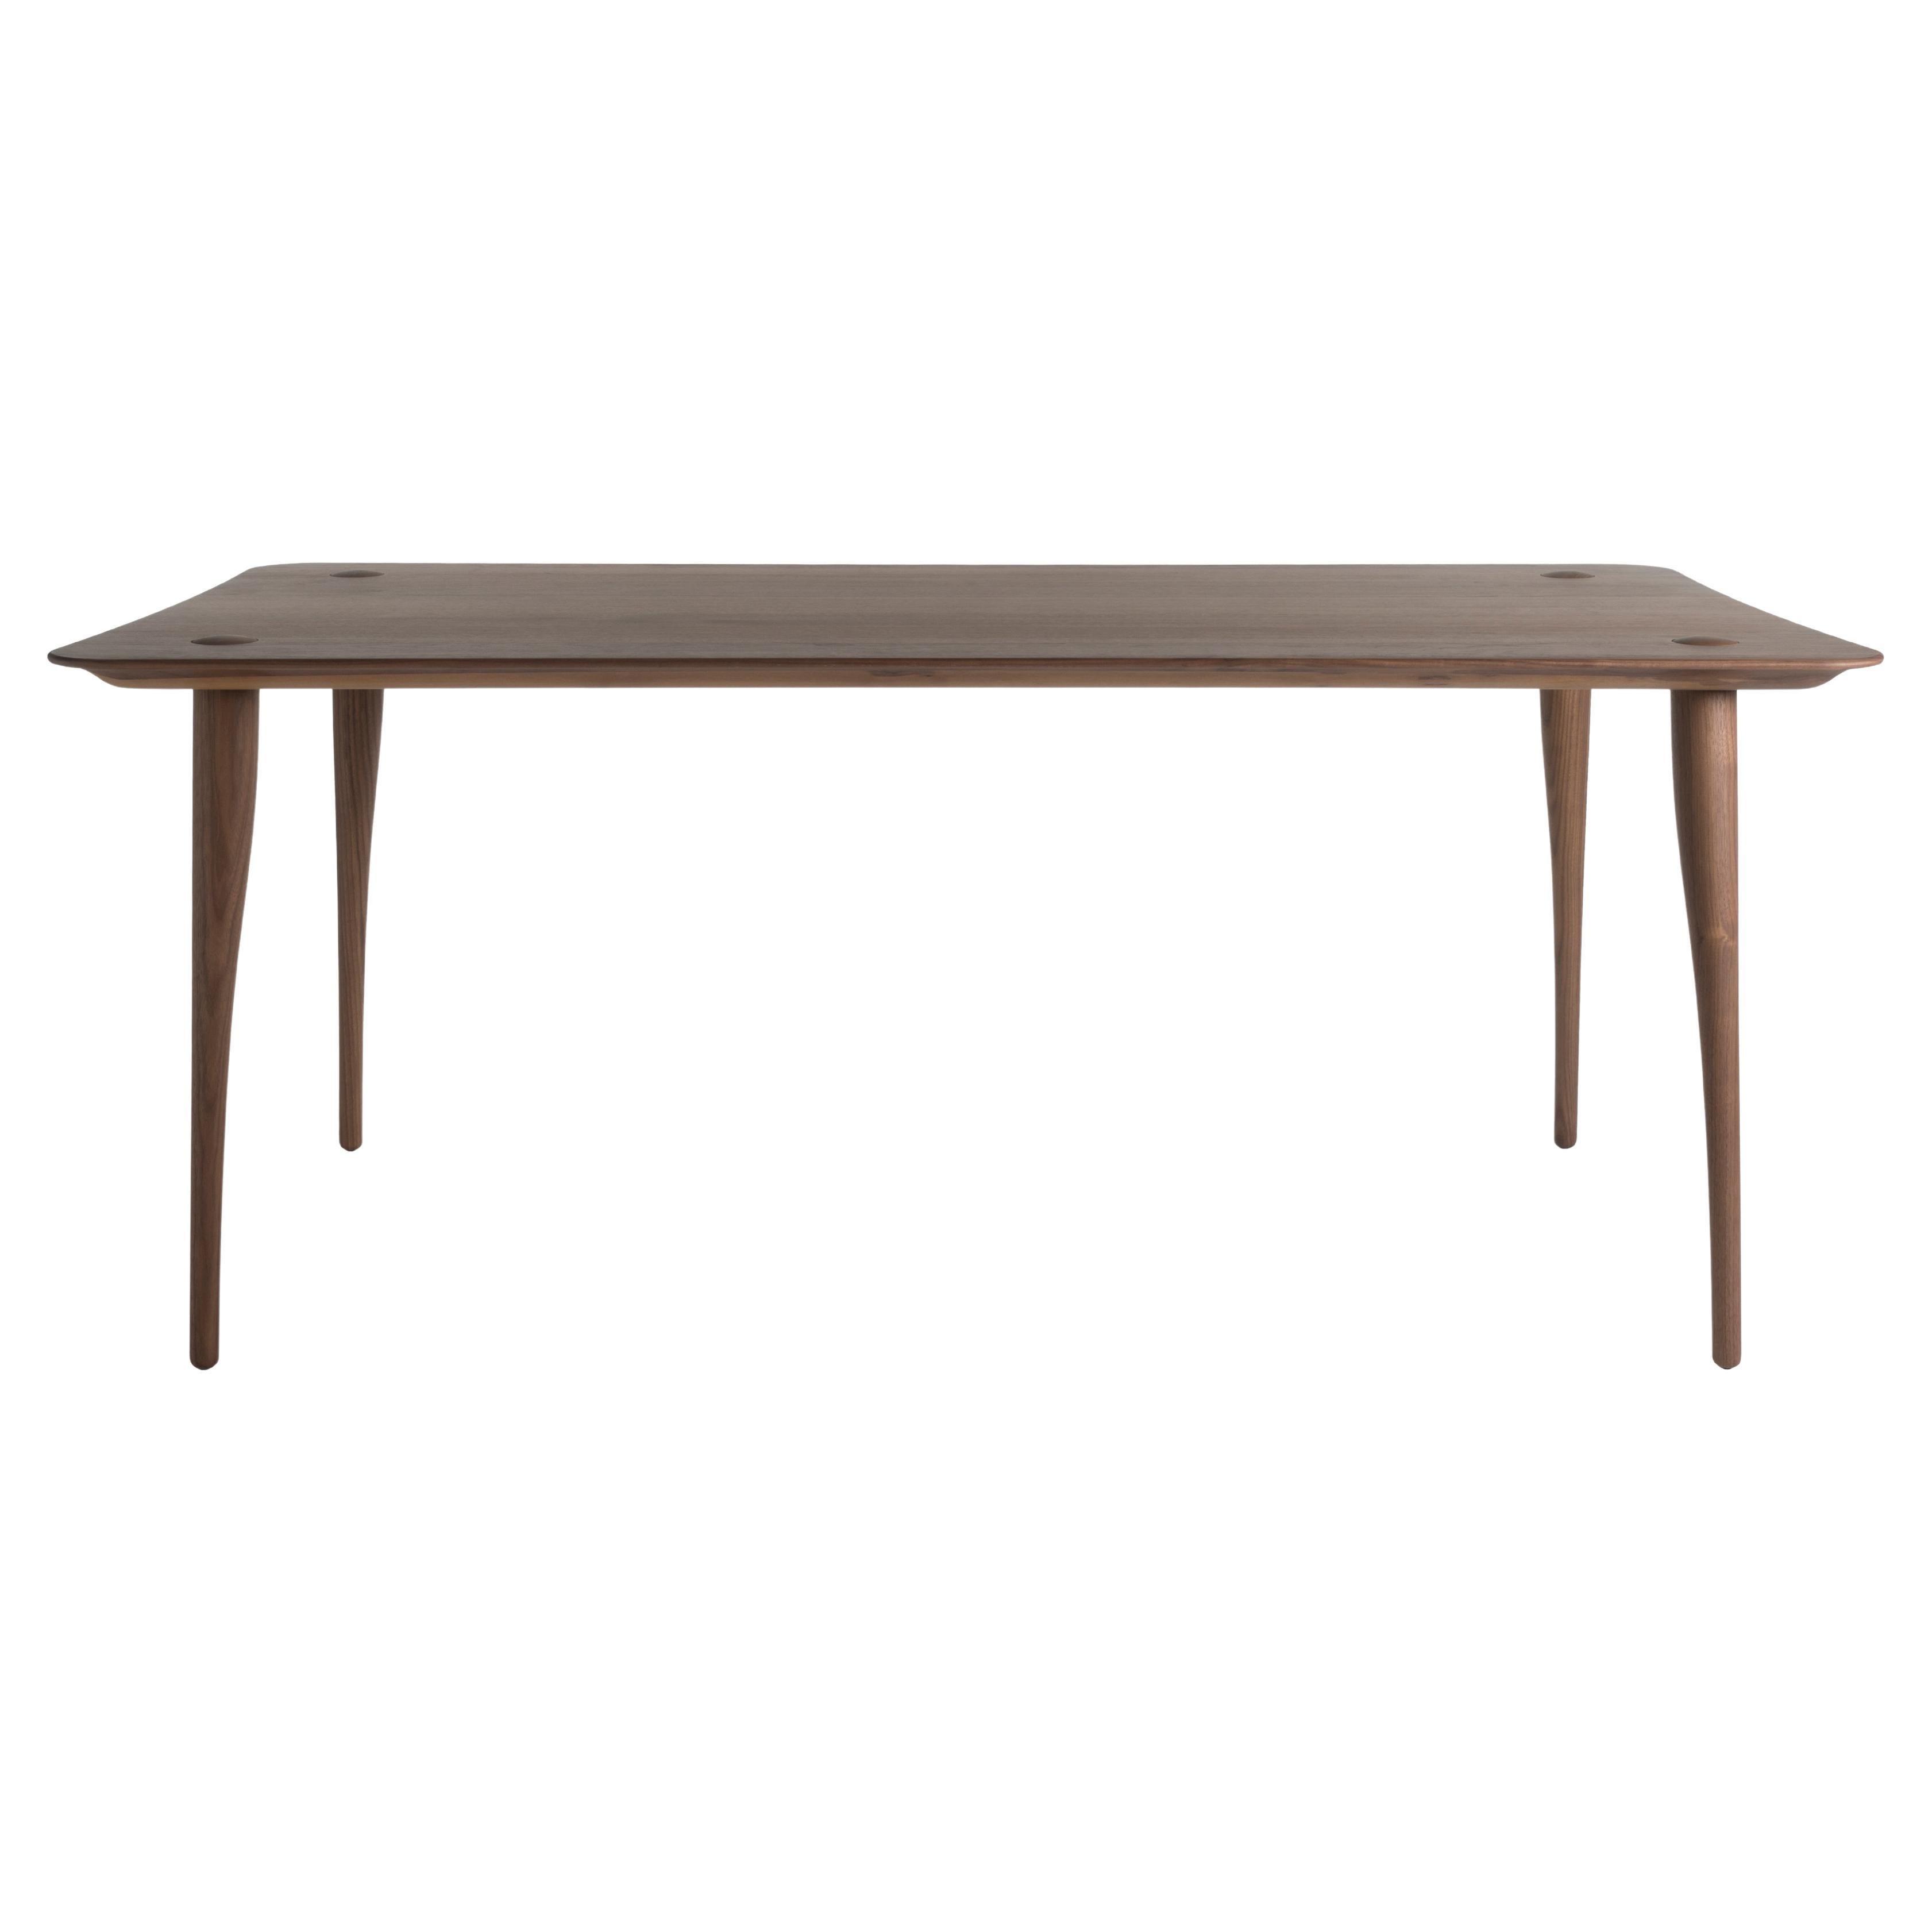 Revised Lewes - solid walnut dining table - rectangle 240x95cm